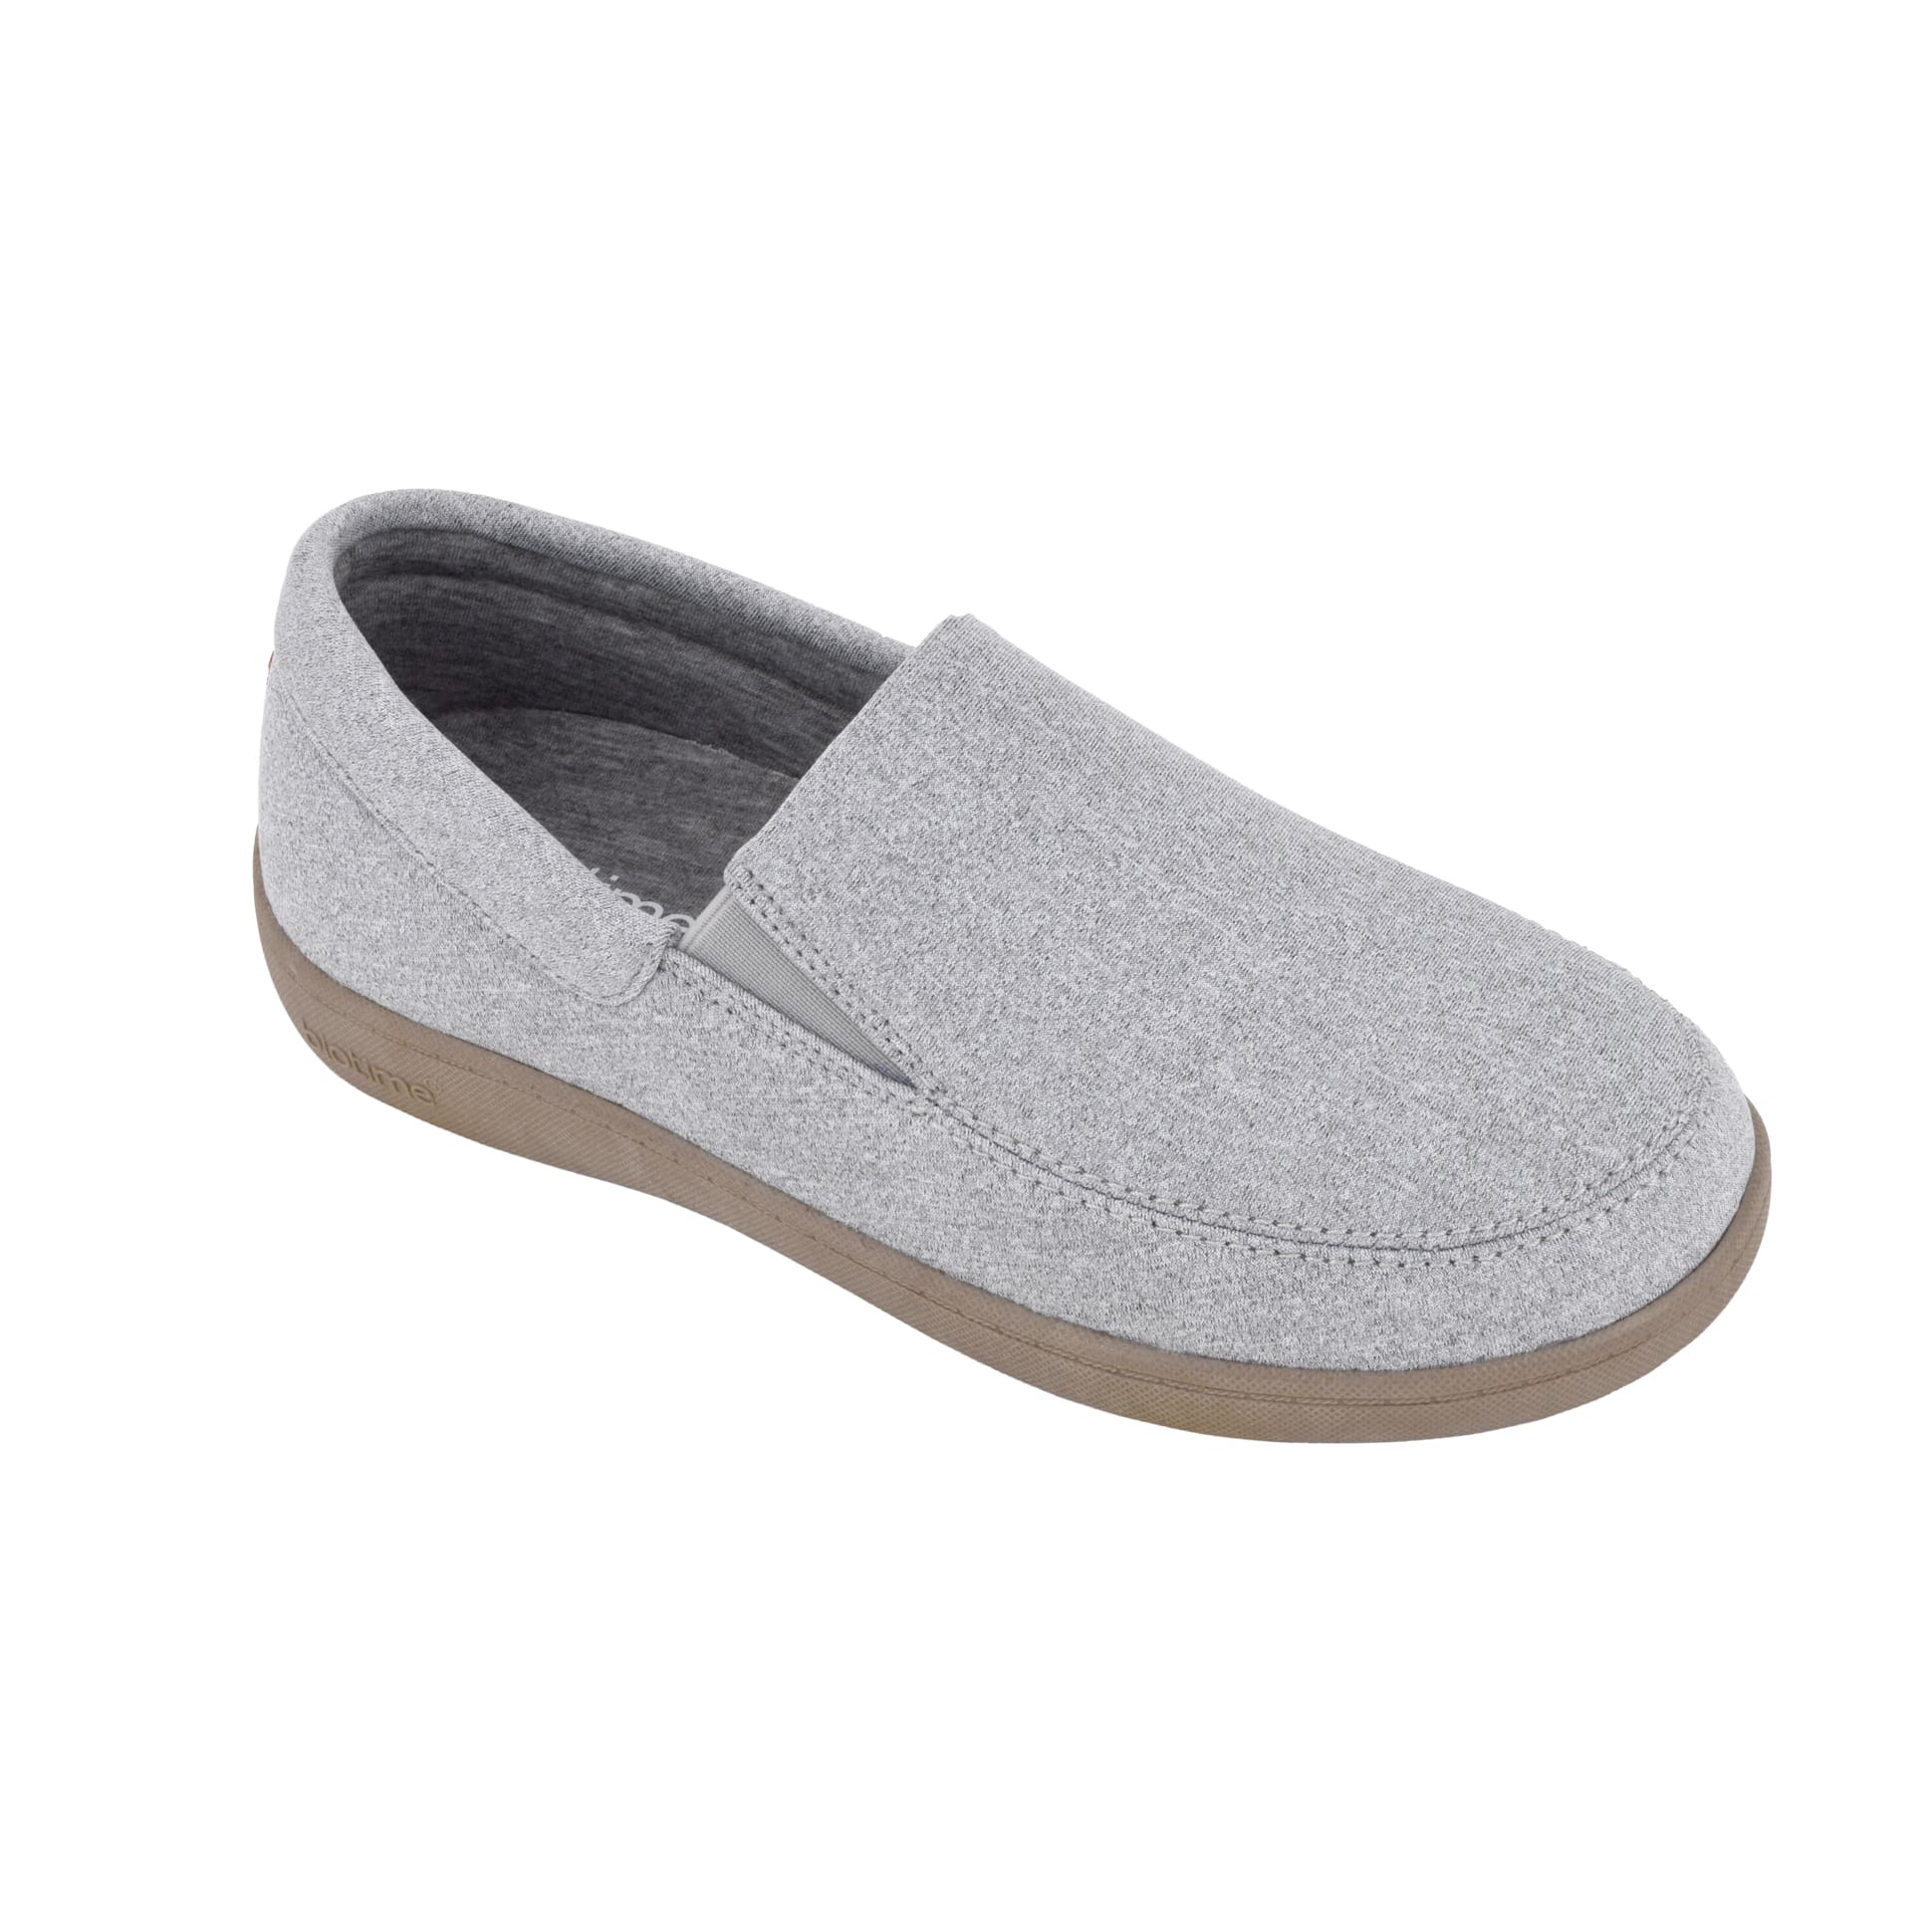 Biotime Women's Danna Slippers with removable contoured insole